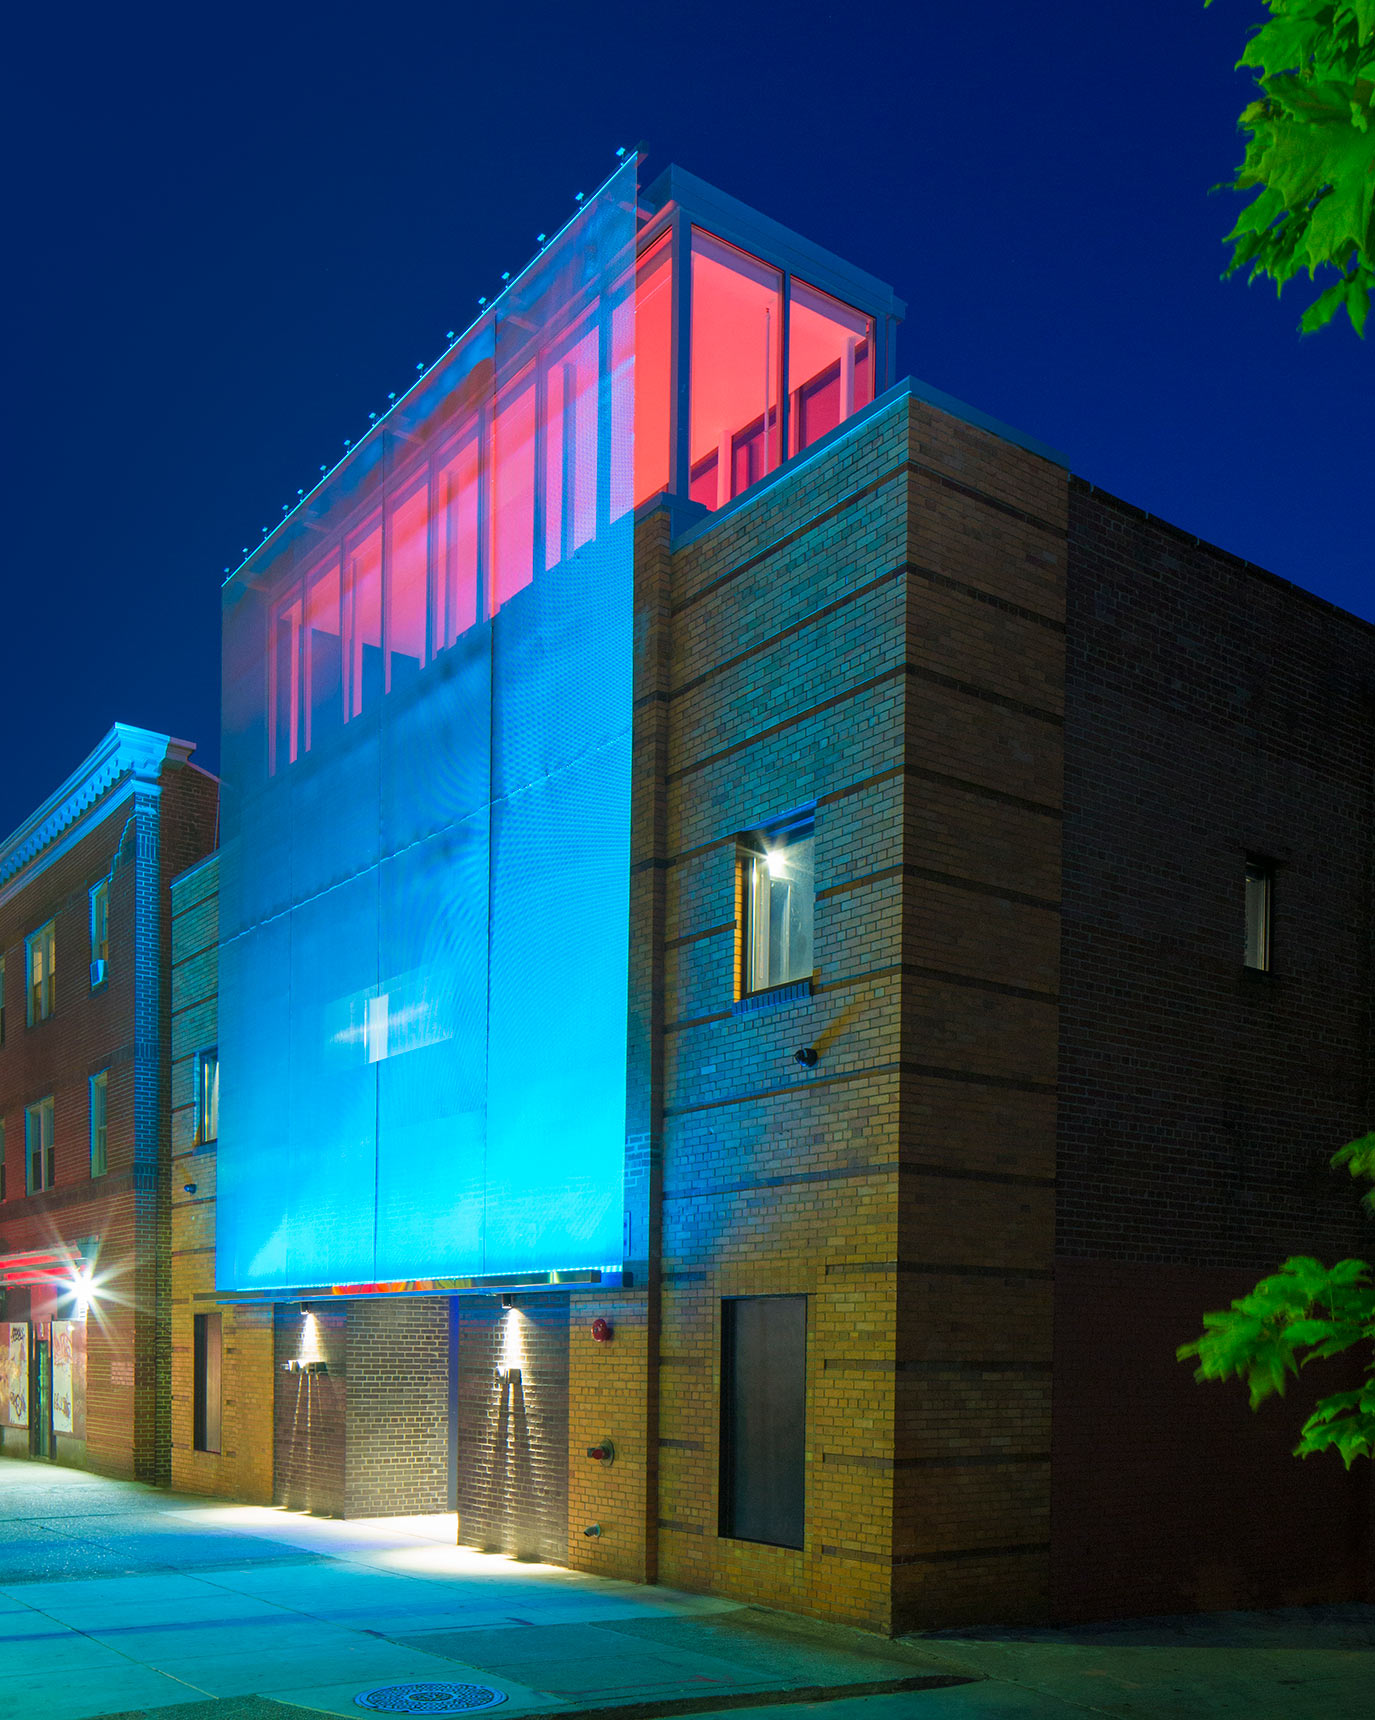 The exterior metal mesh screen facade of the Voxel Theater in Baltimore lit up at night in bright colors